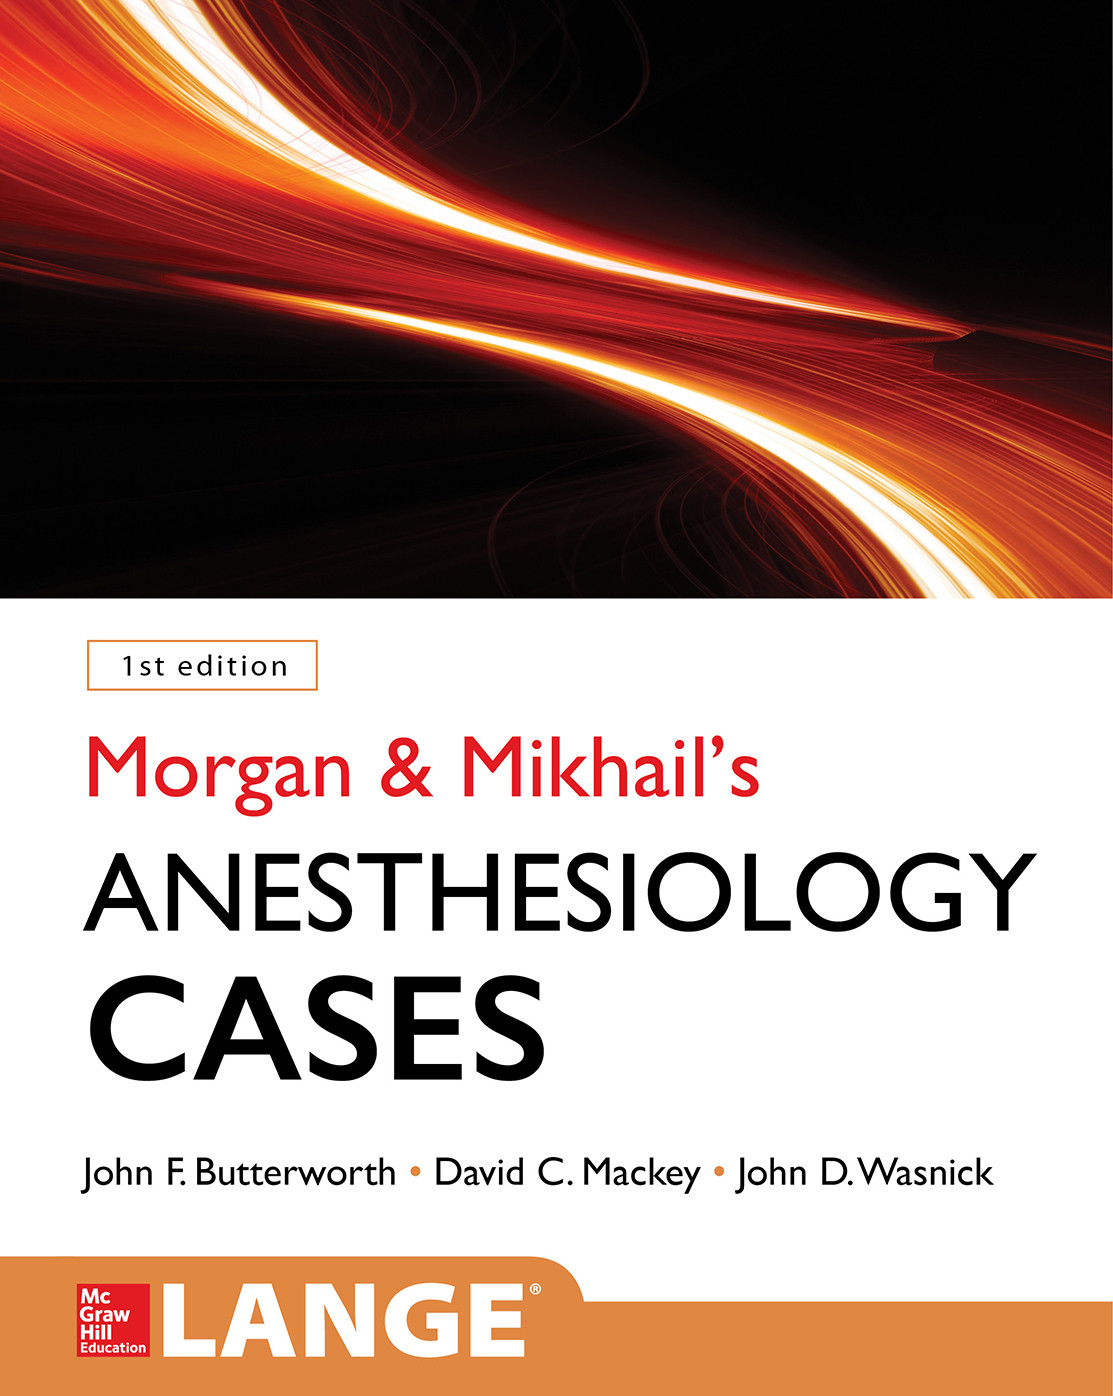 Morgan & Mikhail's Anesthesiology Cases